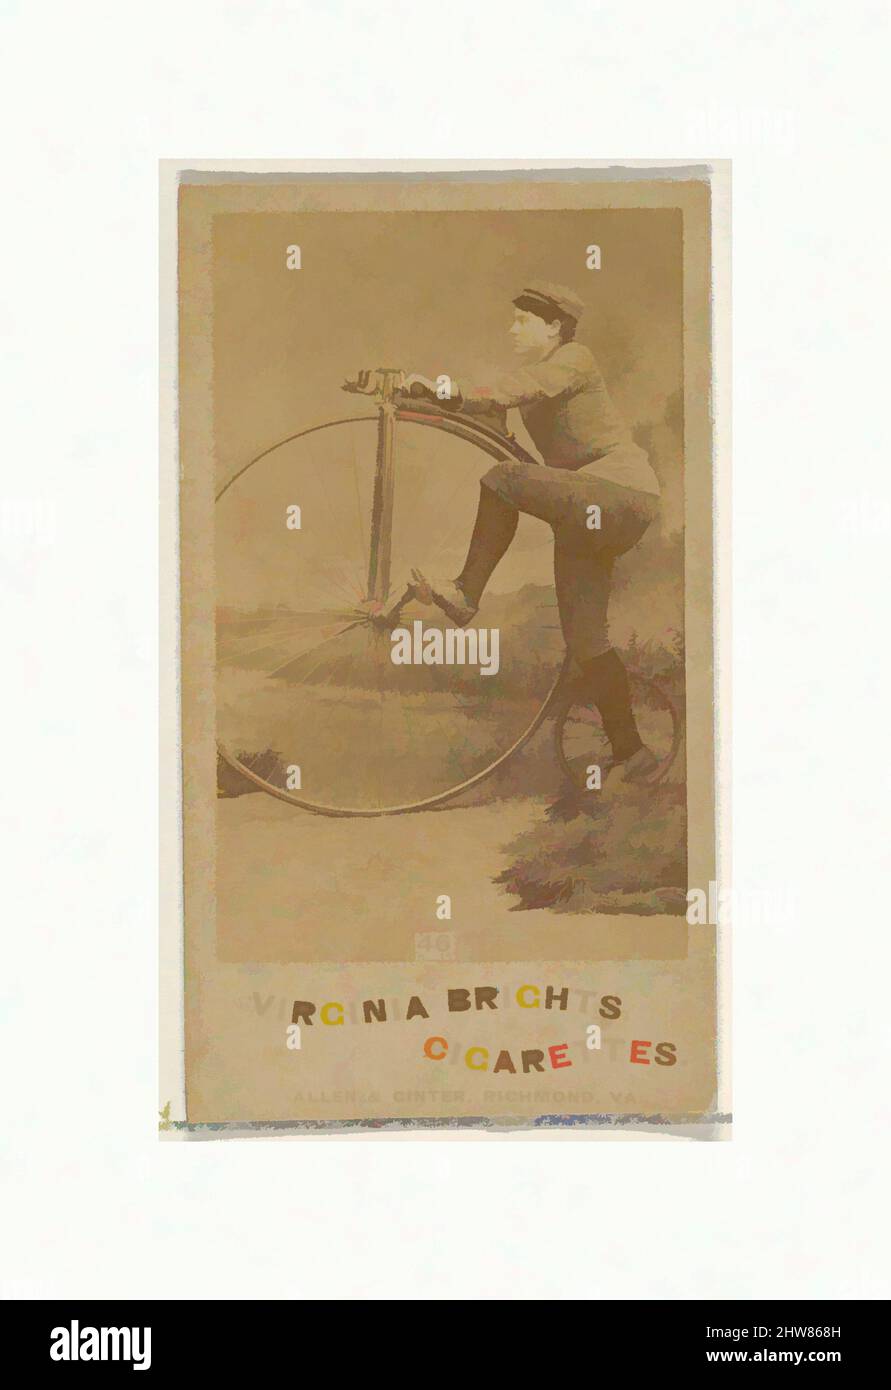 Art inspired by Card 46, from the Girl Cyclists series (N49) for Virginia Brights Cigarettes, 1887, Albumen photograph, Sheet: 2 3/4 x 1 3/8 in. (7 x 3.5 cm), Trade cards from the 'Girl Cyclists' series (N49), issued in 1887 by Allen & Ginter to promote Virginia Brights Cigarettes, Classic works modernized by Artotop with a splash of modernity. Shapes, color and value, eye-catching visual impact on art. Emotions through freedom of artworks in a contemporary way. A timeless message pursuing a wildly creative new direction. Artists turning to the digital medium and creating the Artotop NFT Stock Photo